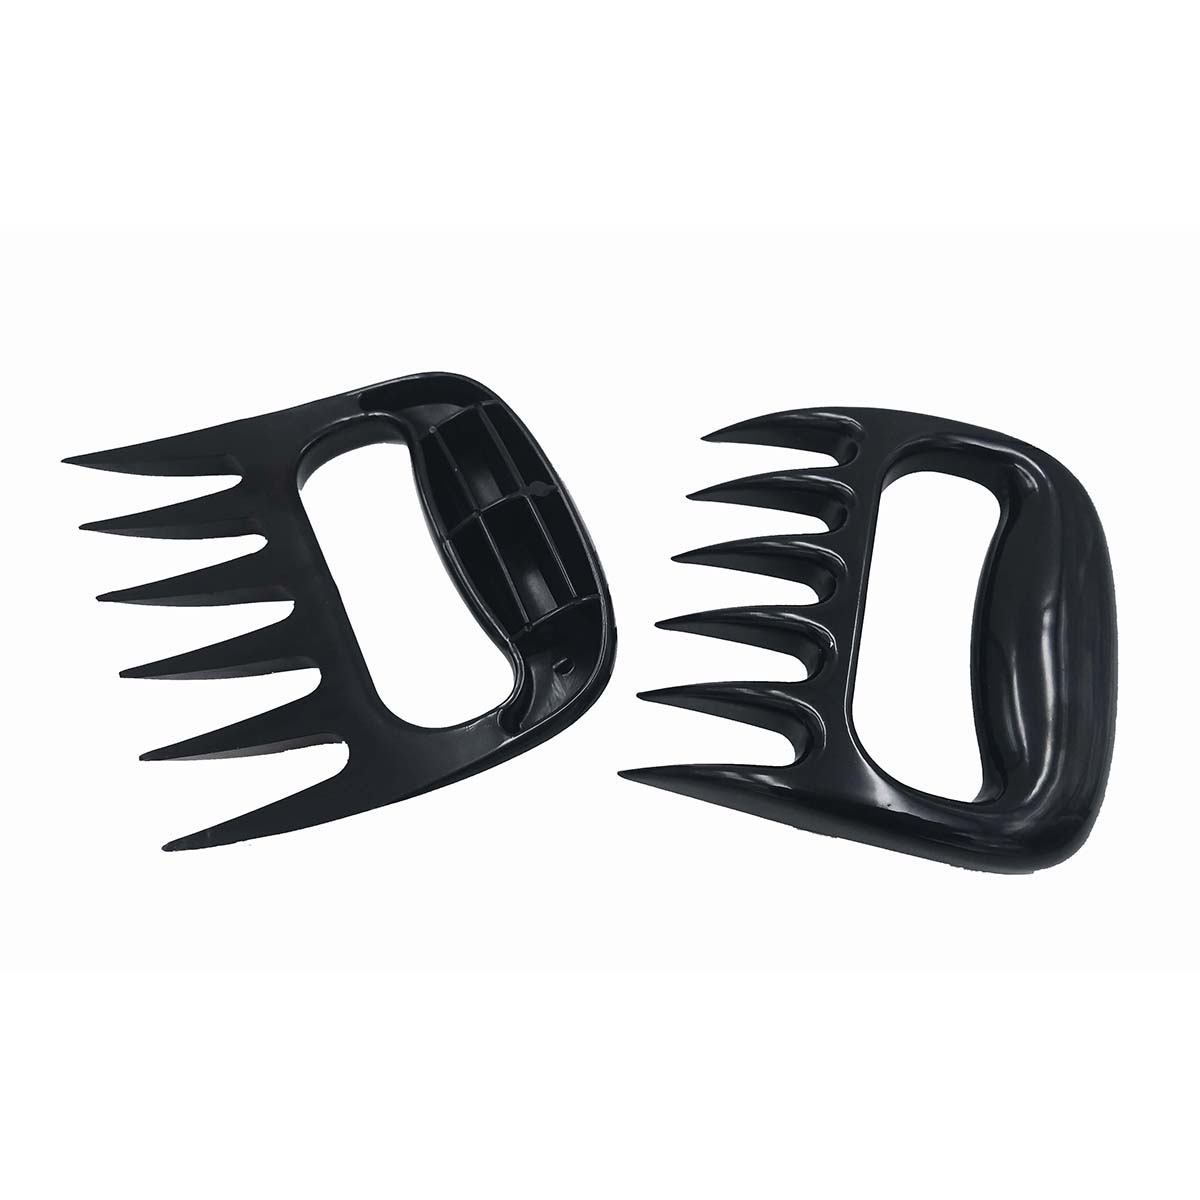 Picture of 21 Century B60A7 Plastic Meat Claw